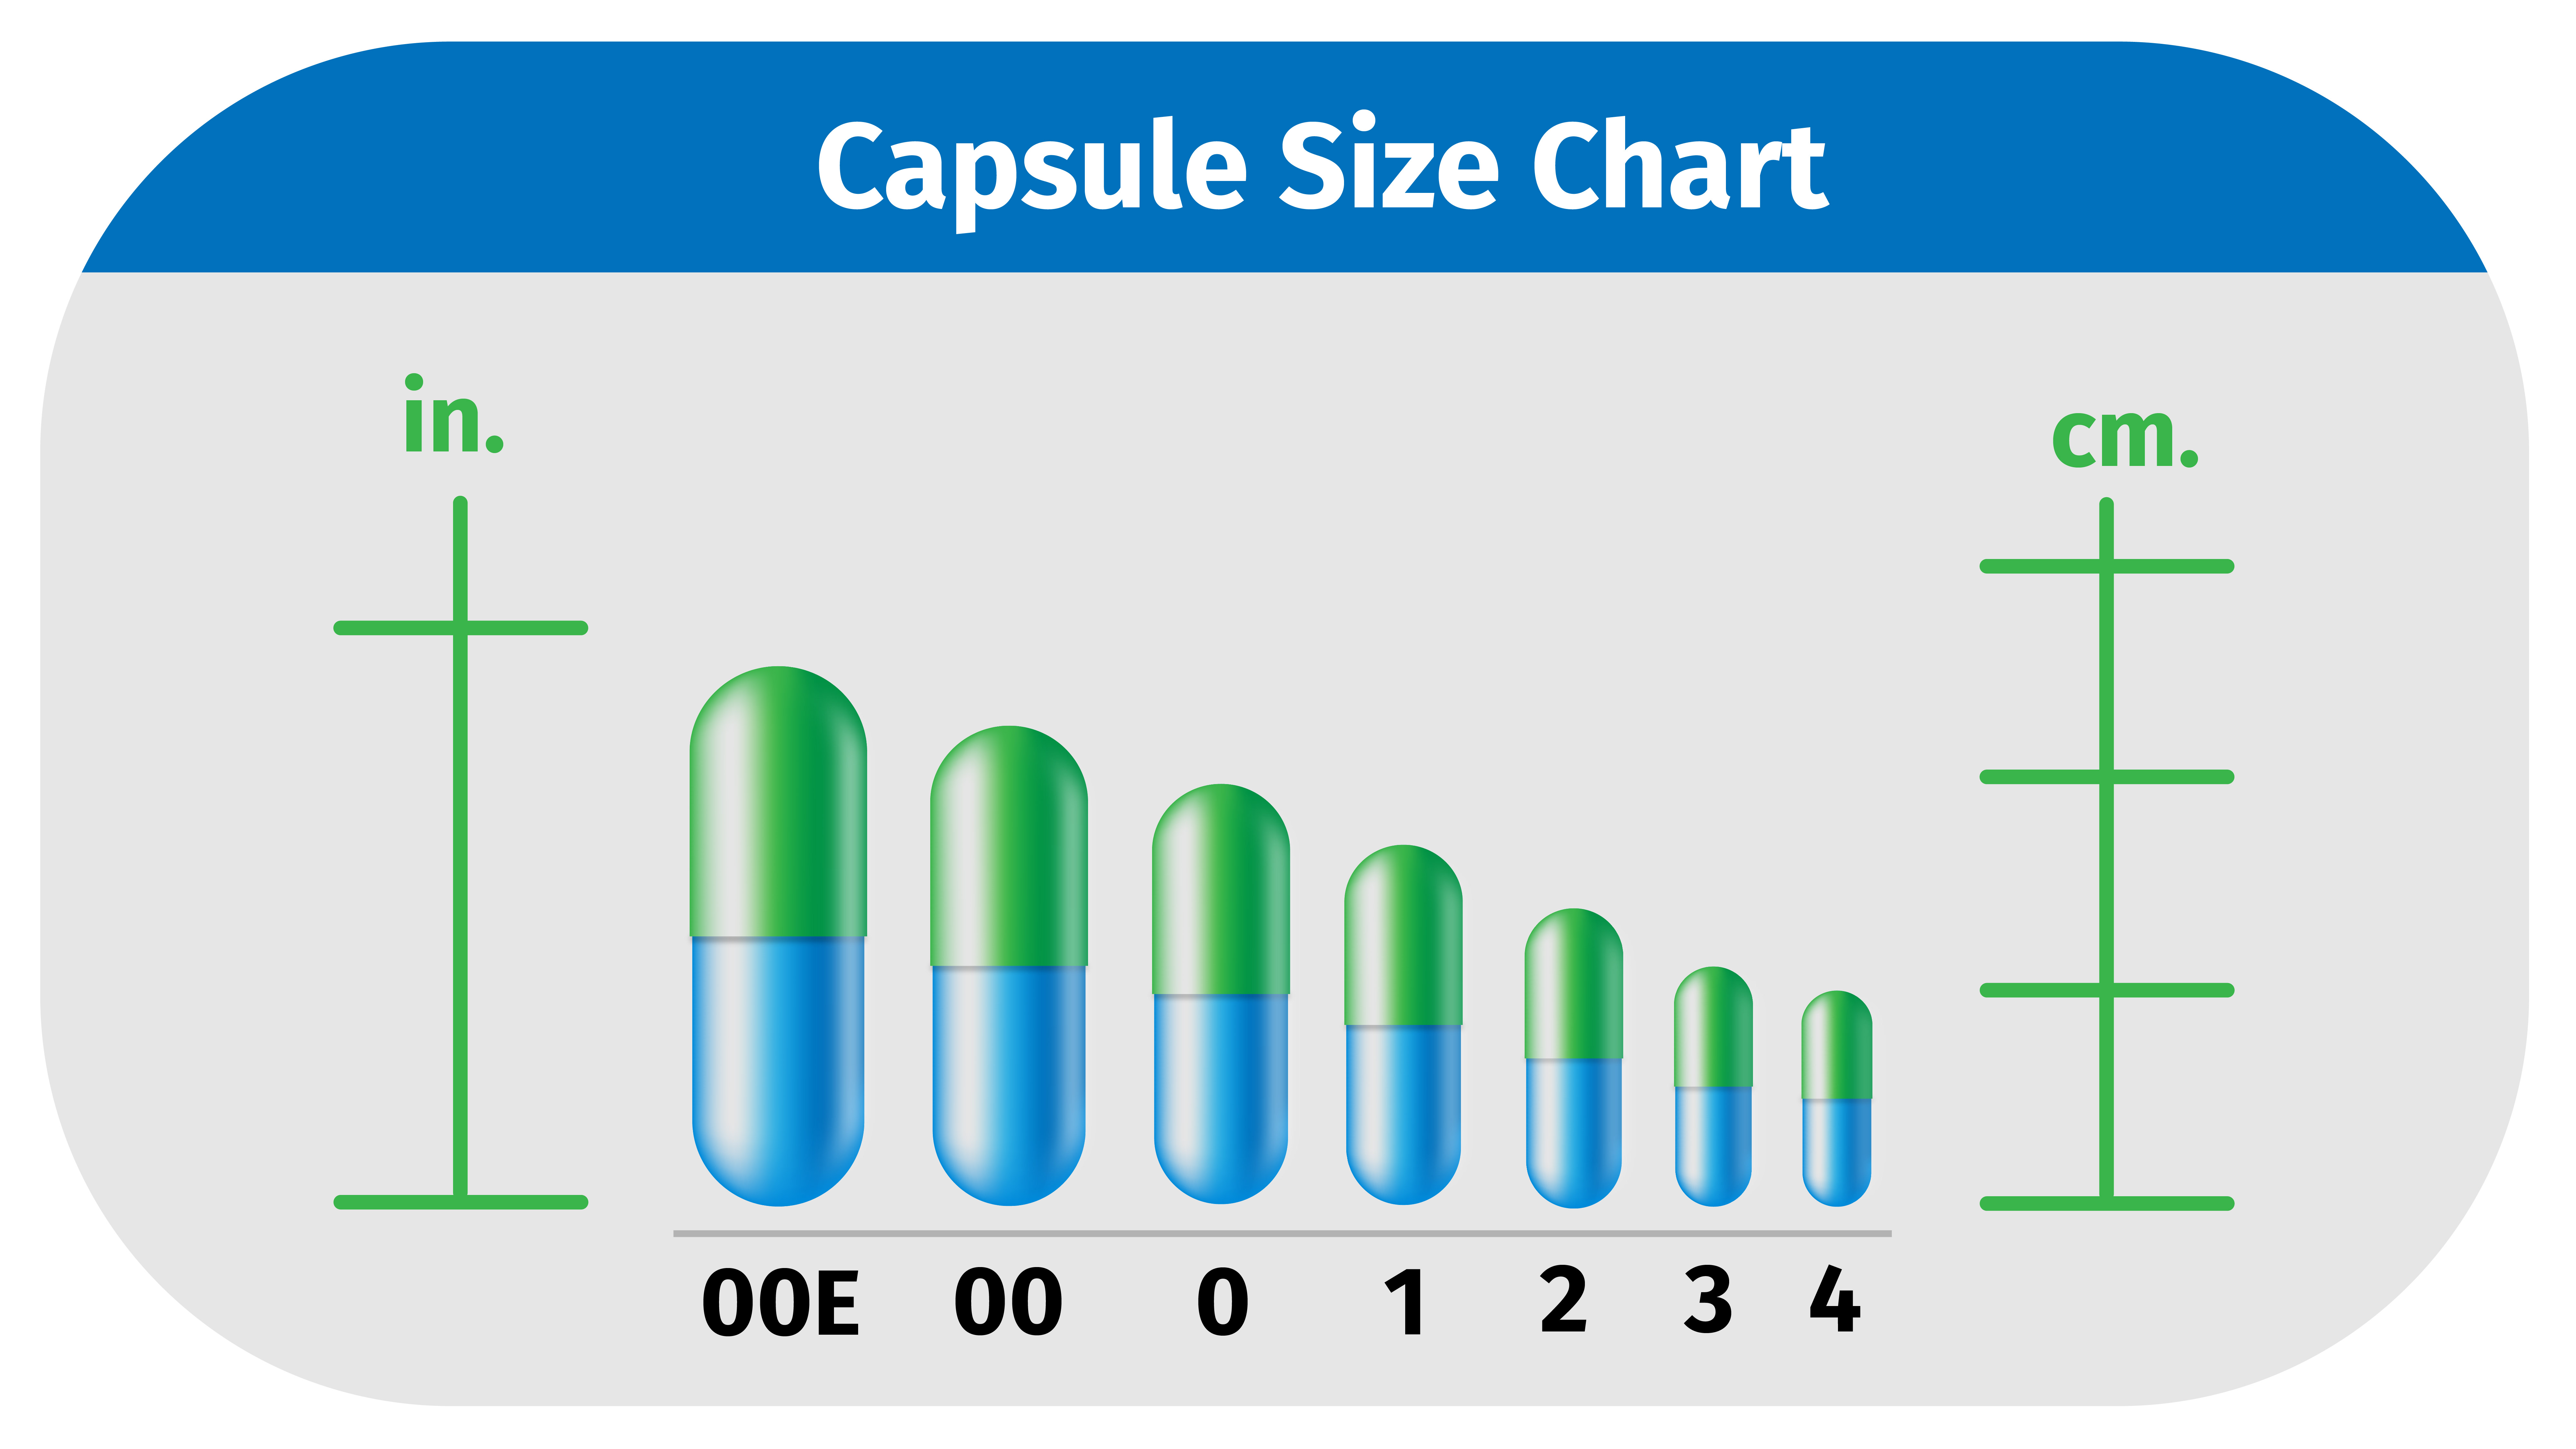 A chart show various capsule sizes